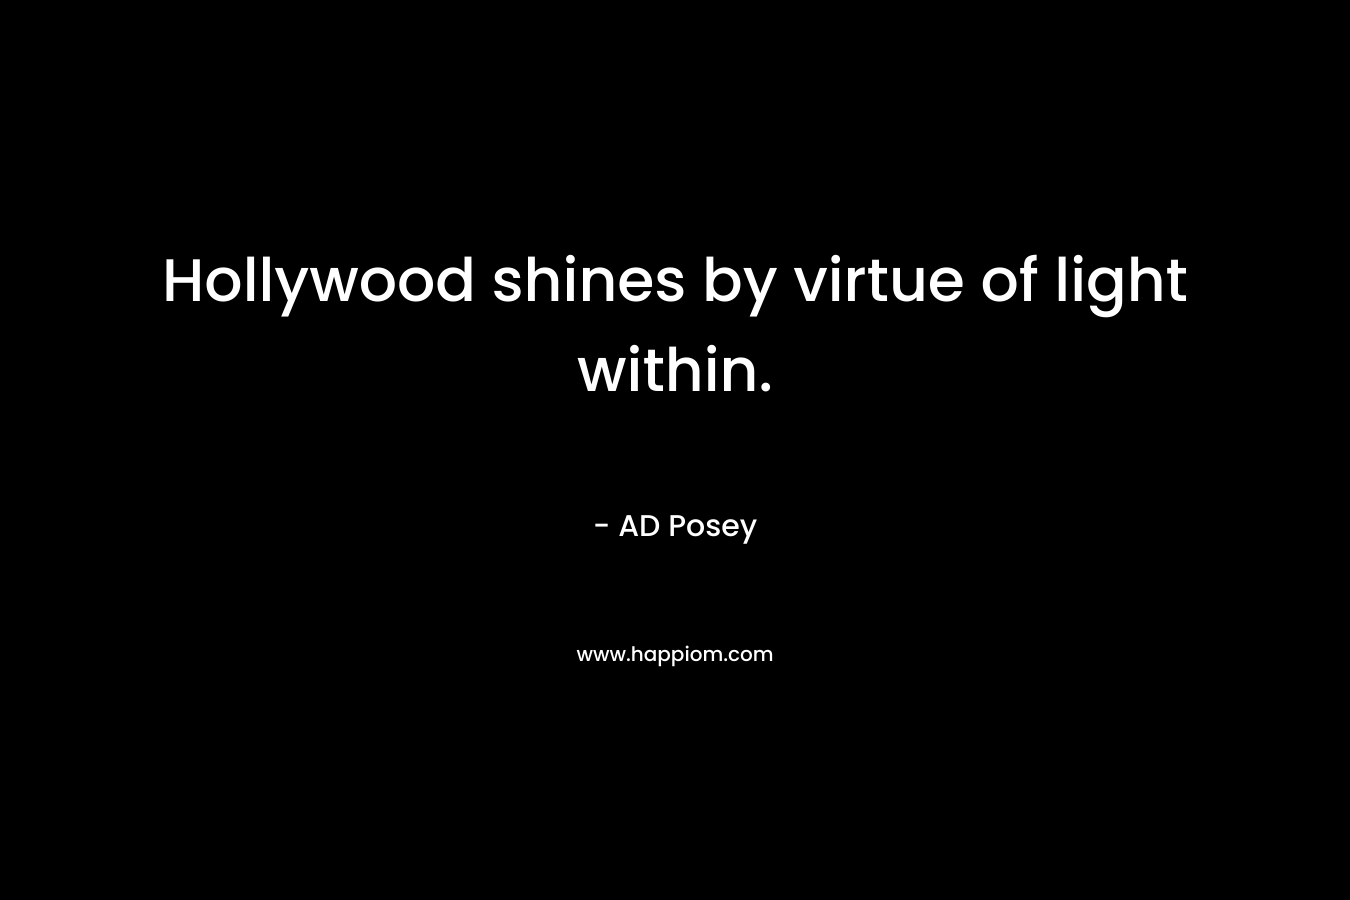 Hollywood shines by virtue of light within. – AD Posey